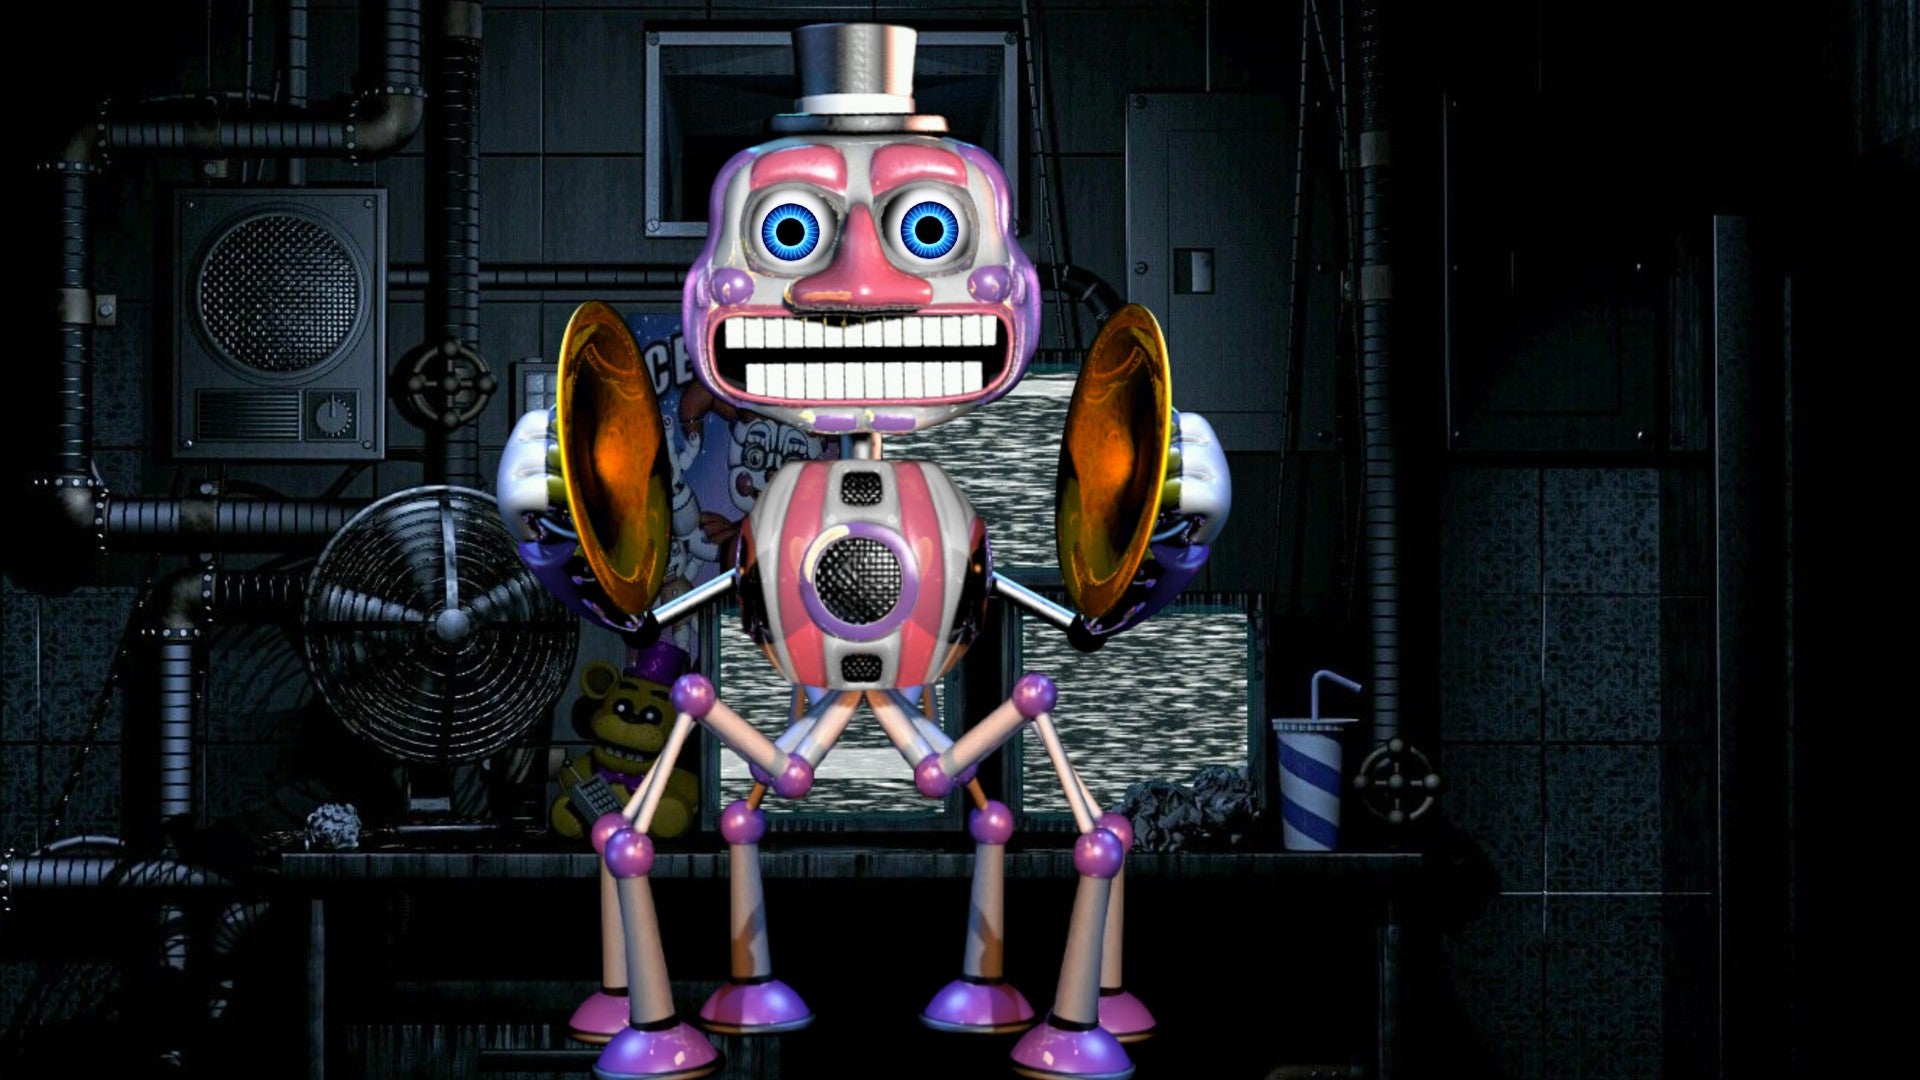 Made this cursed image of Music Man with eyes